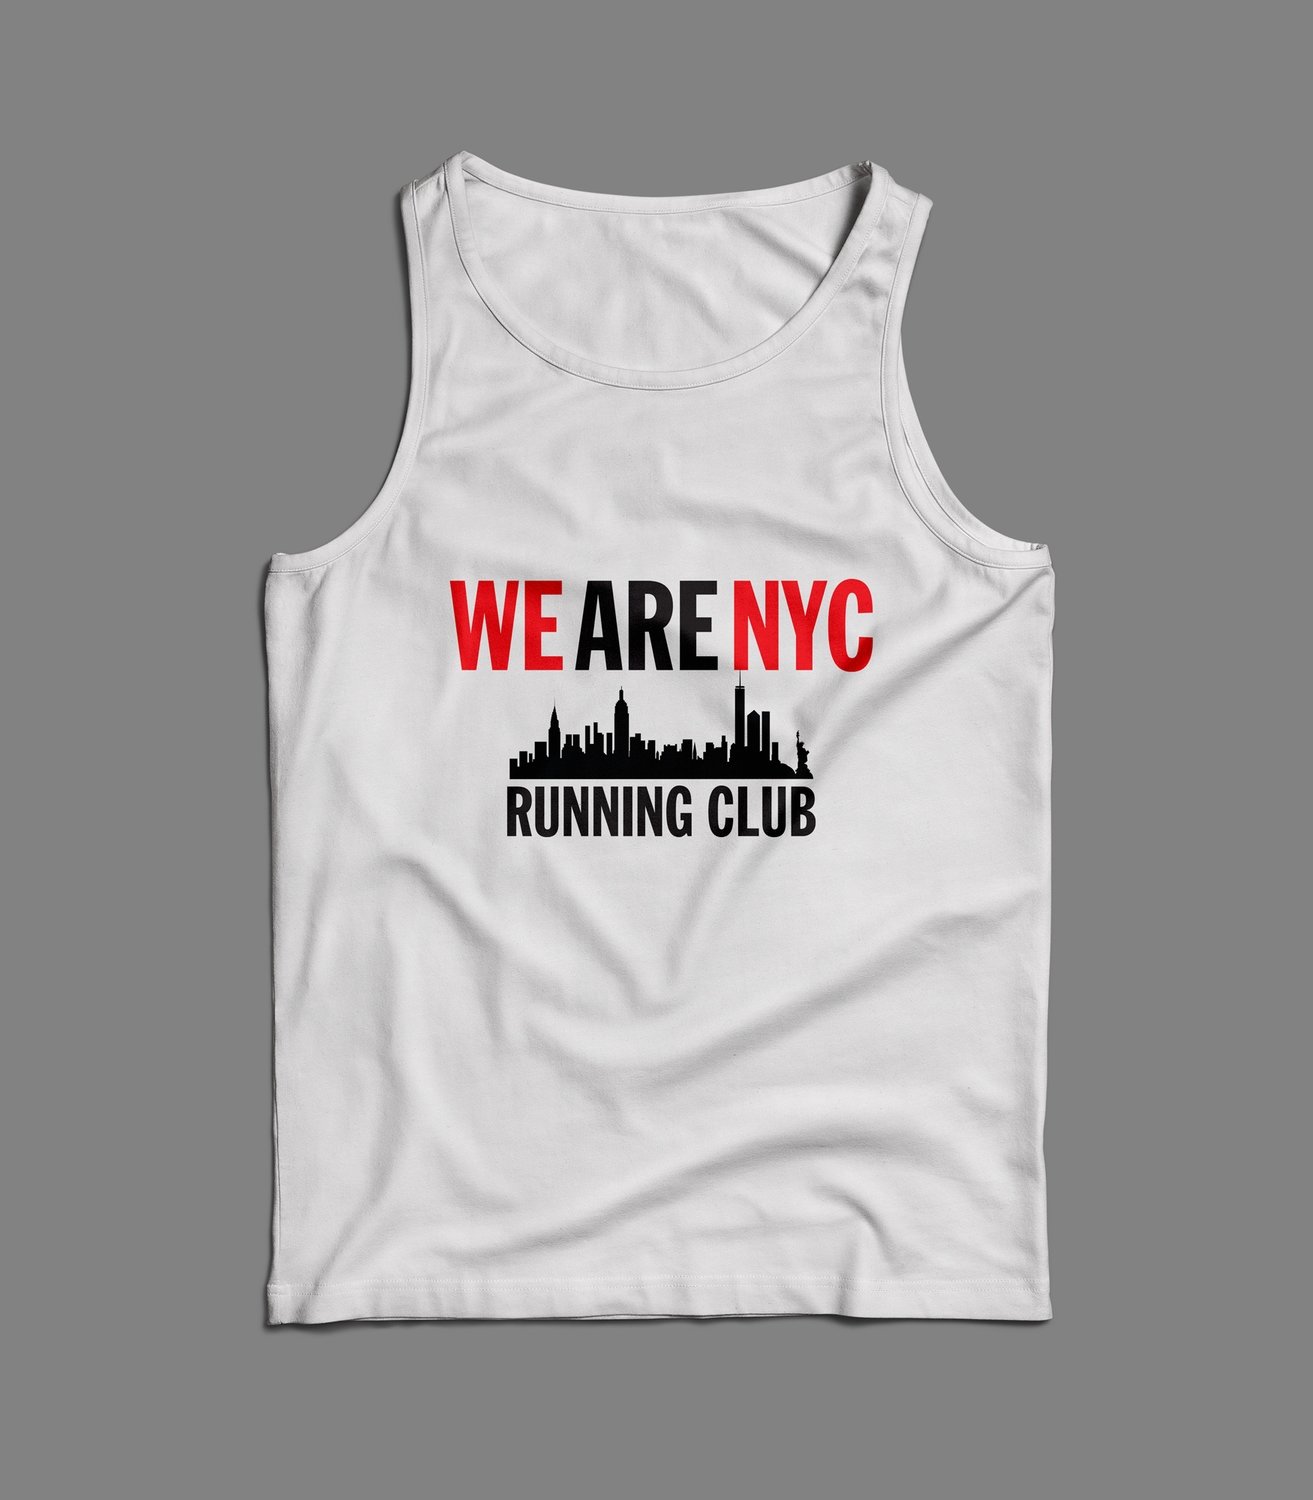 WE ARE NYC "IMPACT SKYLINE" TANK/SINGLET (various colors)